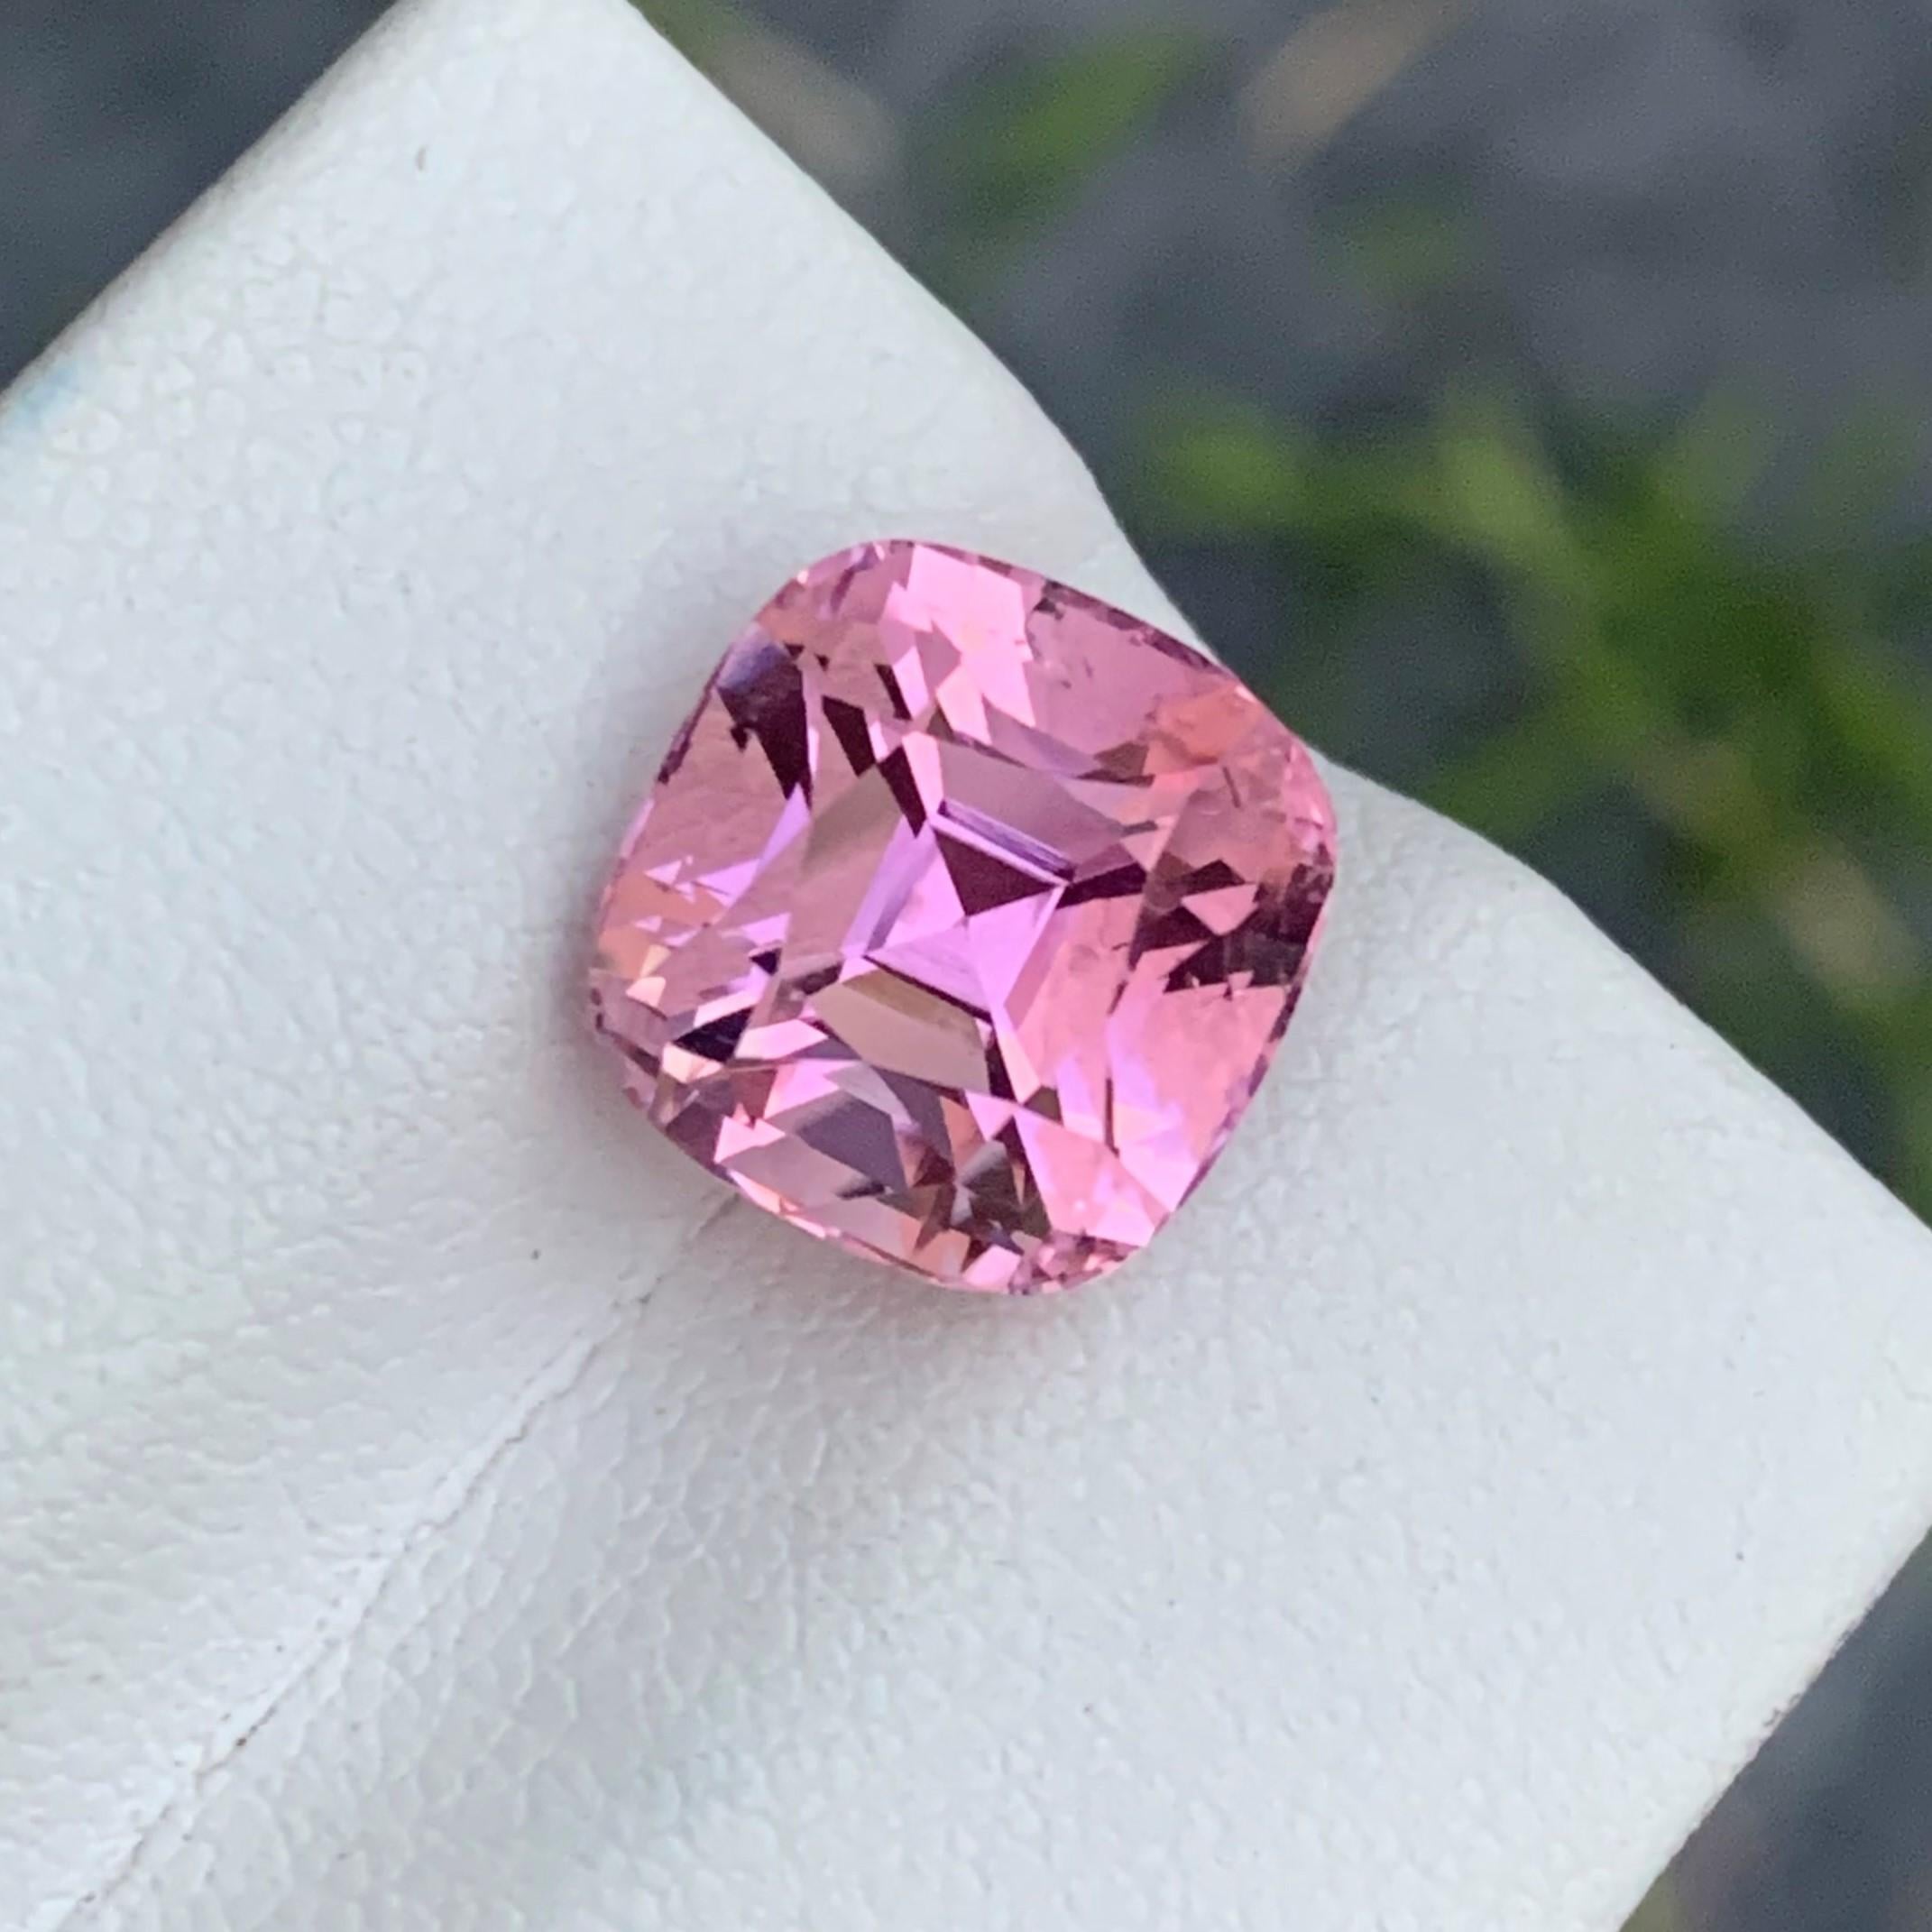 Faceted Tourmaline
Weight: 5.85 Carats
Dimension: 10.2x10x8.8 Mm
Origin: Kunar Afghanistan
Color: Pink
Shape: Cushion
Clarity: Eye Clean
Certificate: On Demand

With a rating between 7 and 7.5 on the Mohs scale of mineral hardness, tourmaline